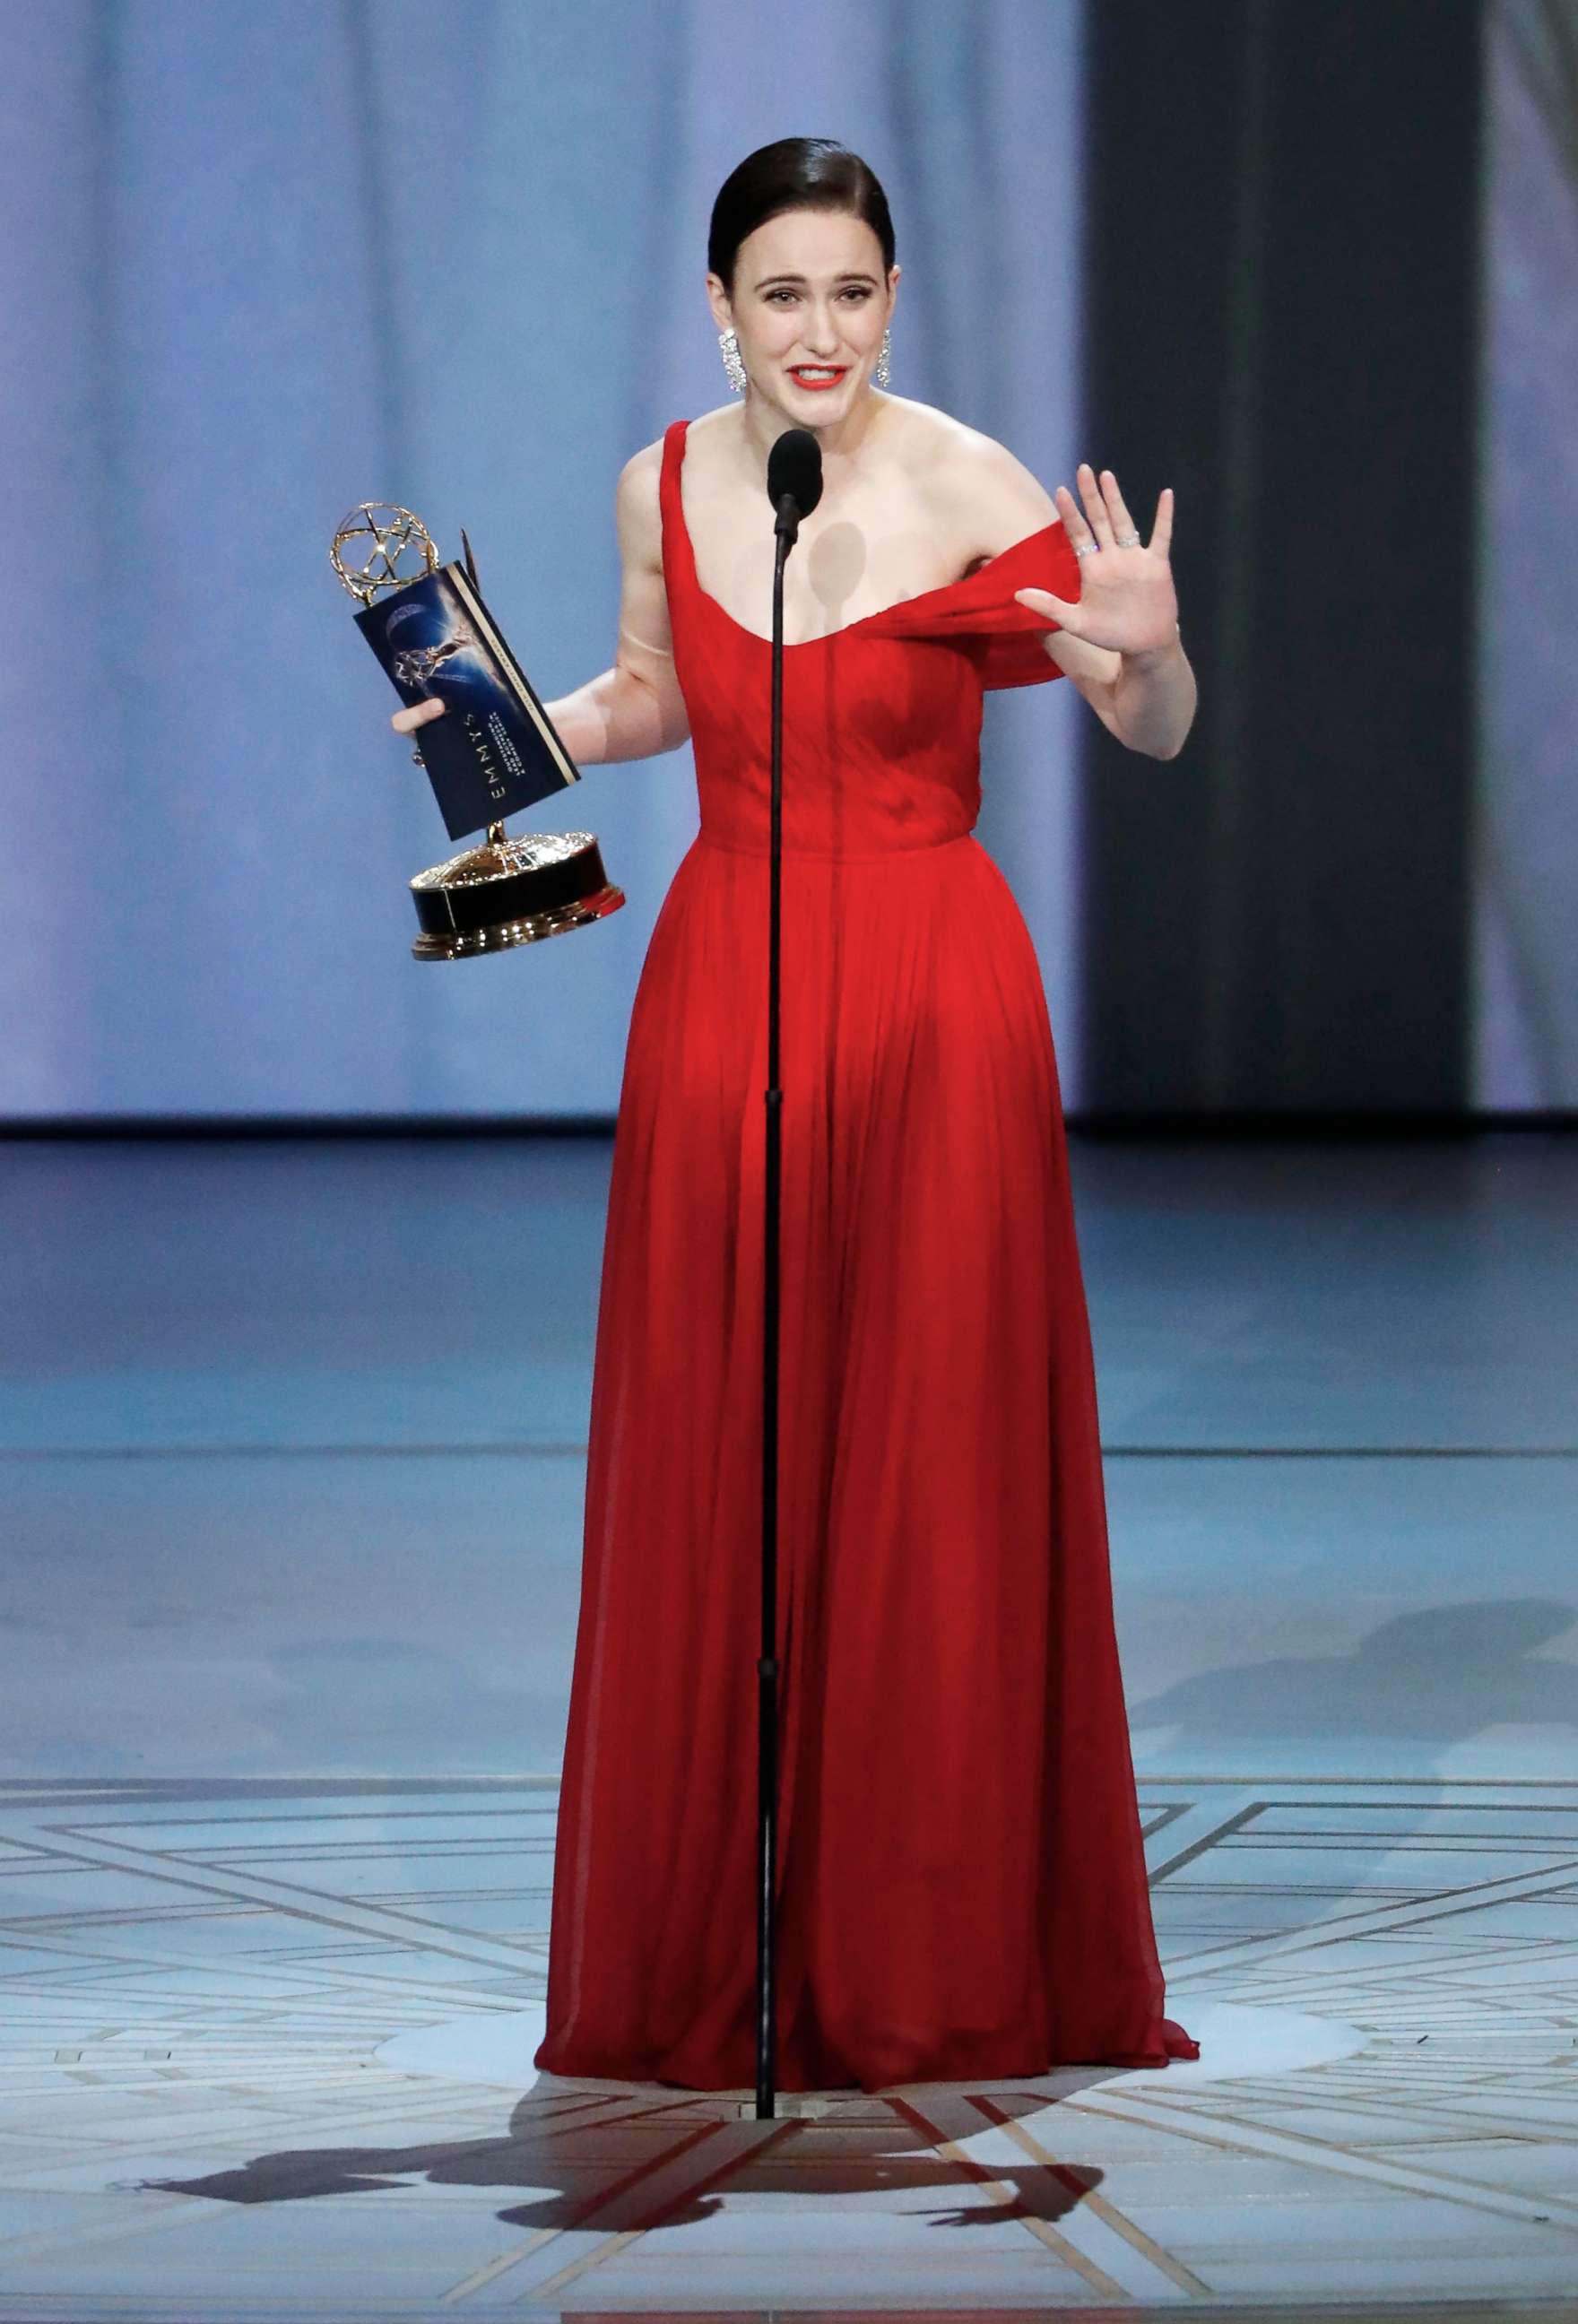 PHOTO: Rachel Brosnahan wins the Emmy for Outstanding Lead Actress in a Comedy series  for "The Marvelous Mrs. Maisel."